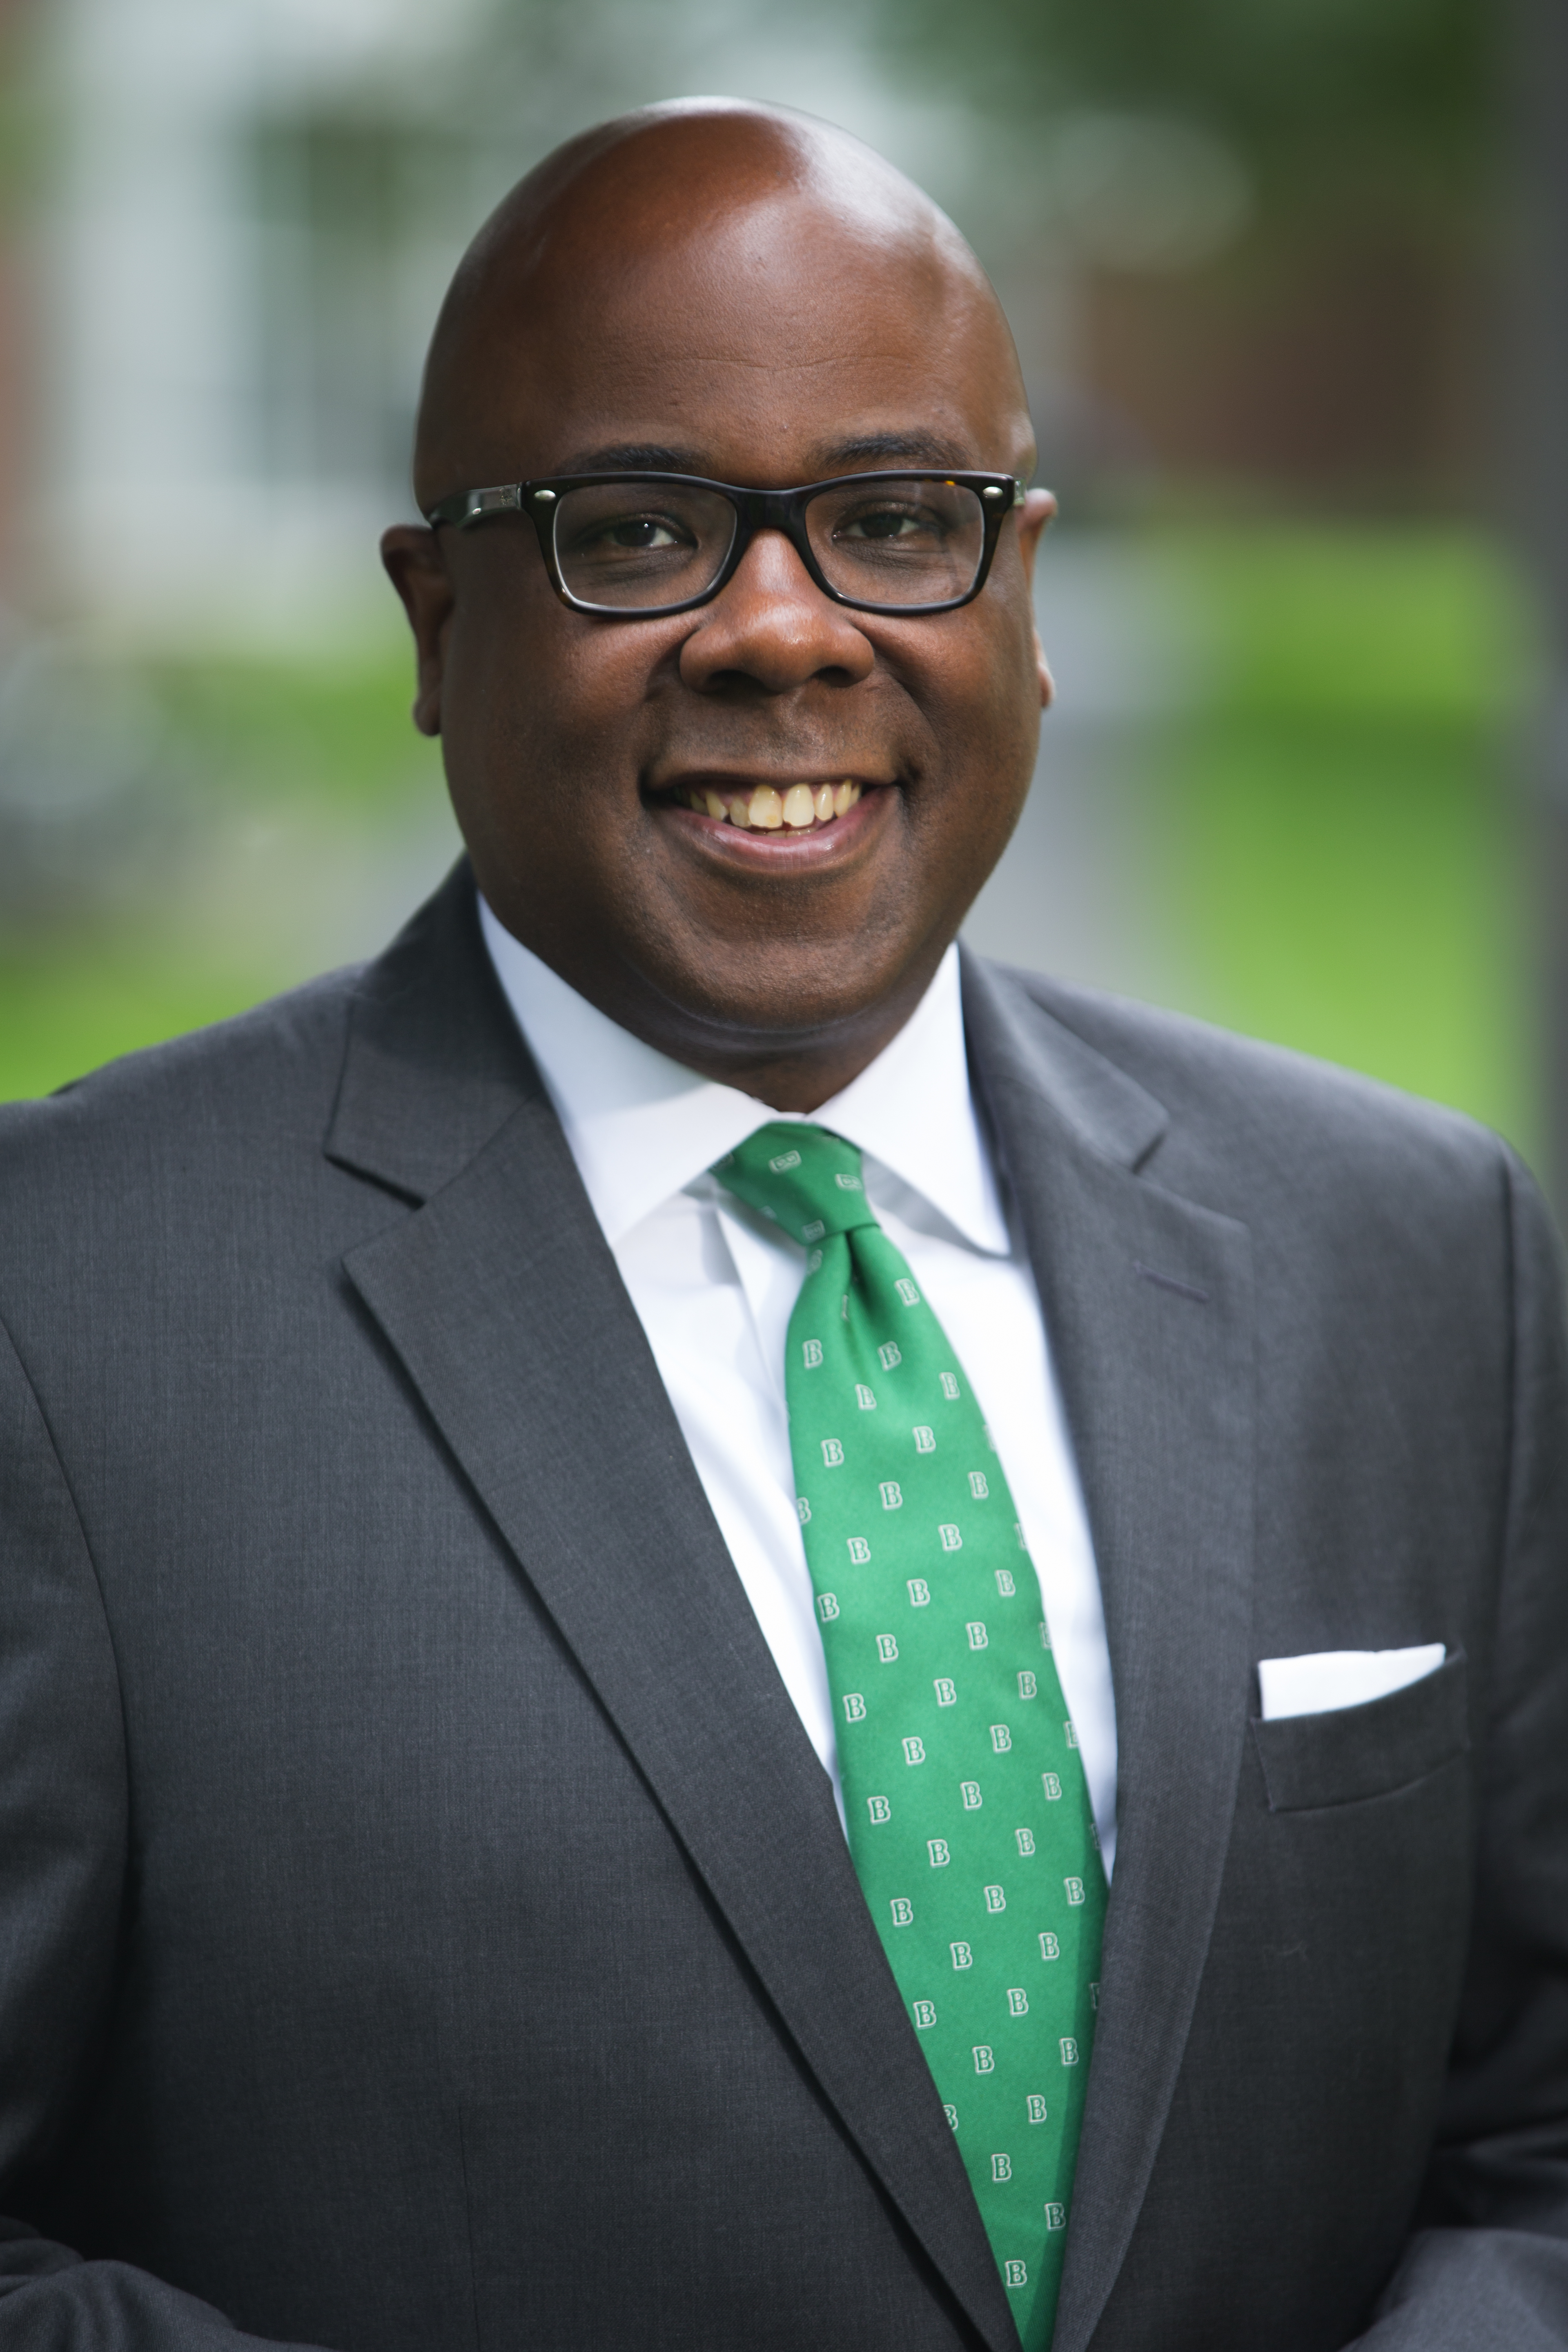 Lawrence P. Ward, Ed.D., Vice President for Learner Success and Dean of Campus Life